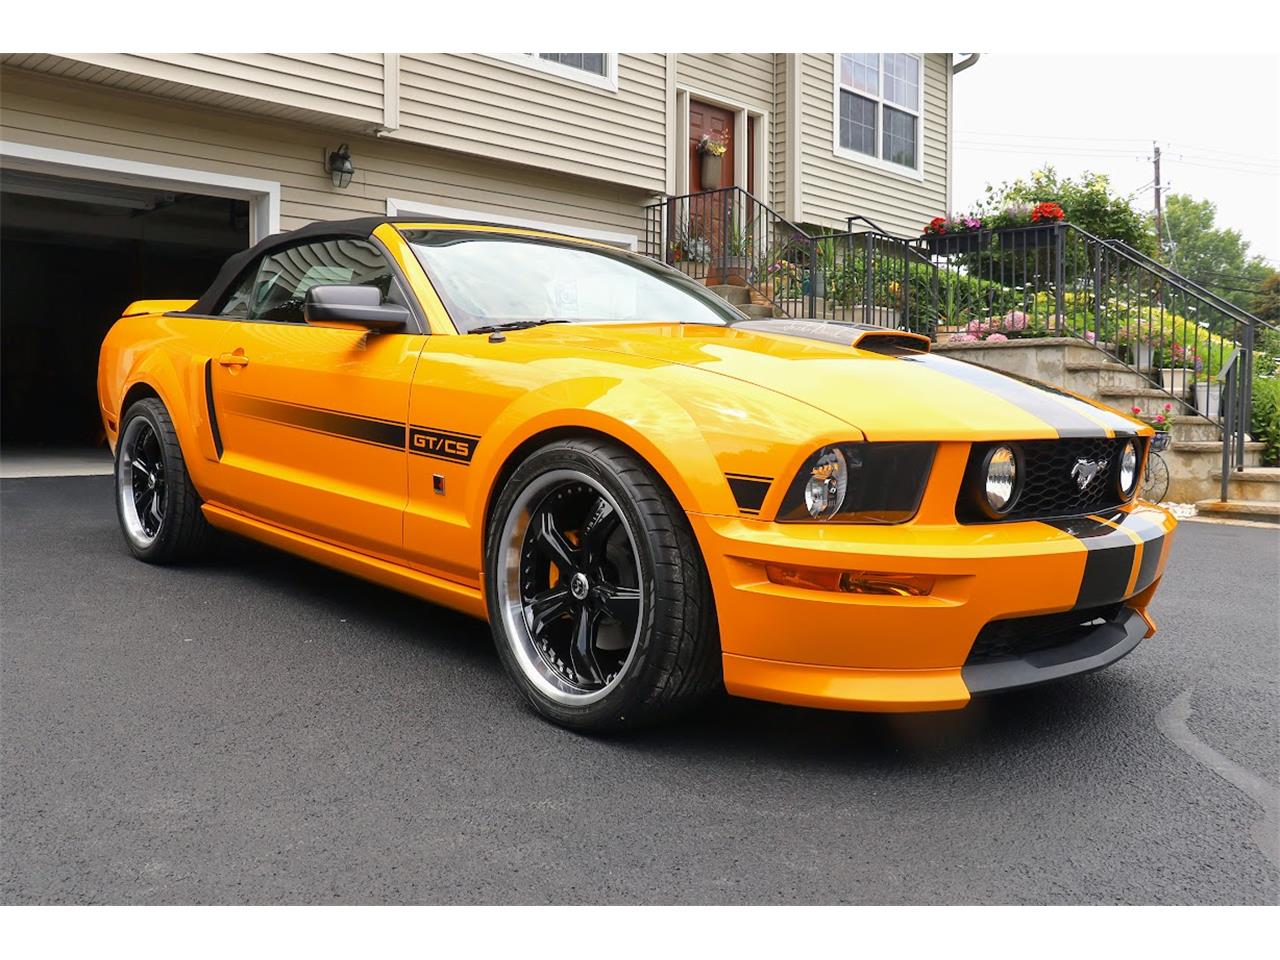 2008 Ford Mustang GT/CS (California Special) in STONY POINT, New York